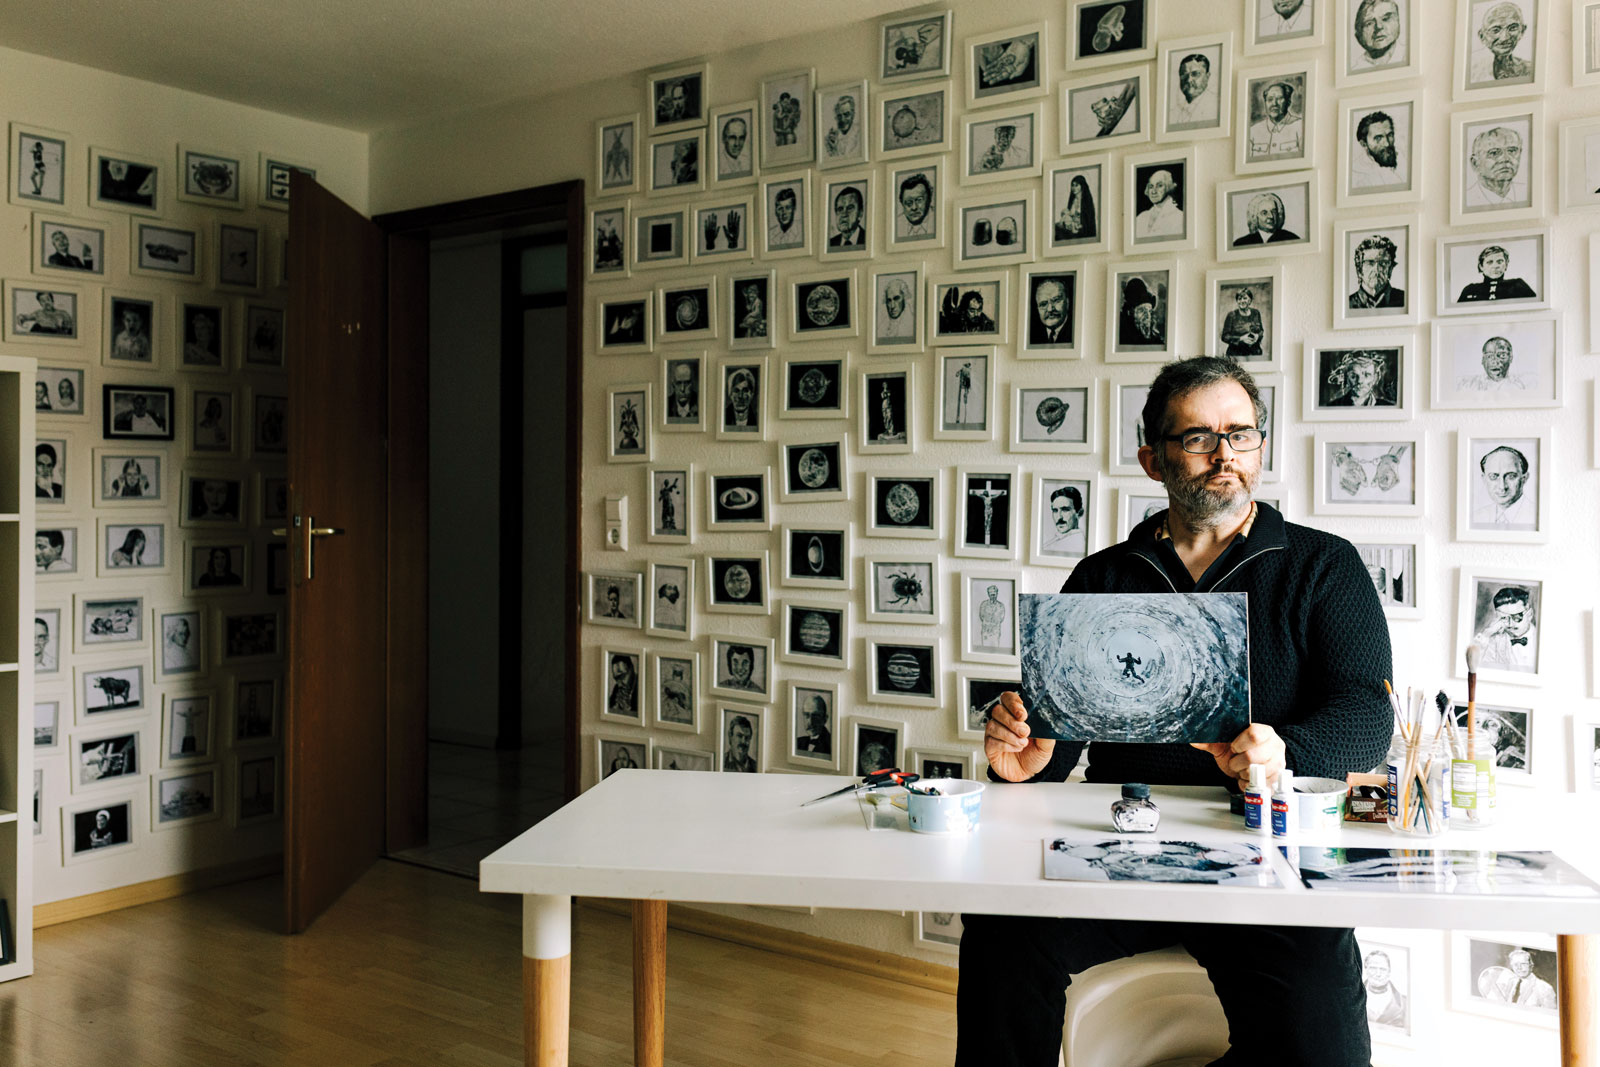 Thomas Müller sits at a desk and holds up a painting. The painting is in black and white and depicts a silhouetted figure falling into a deep hole. Müller's expression is serious. The walls behind him are filled from floor to ceiling with more black and white artwork in white frames.